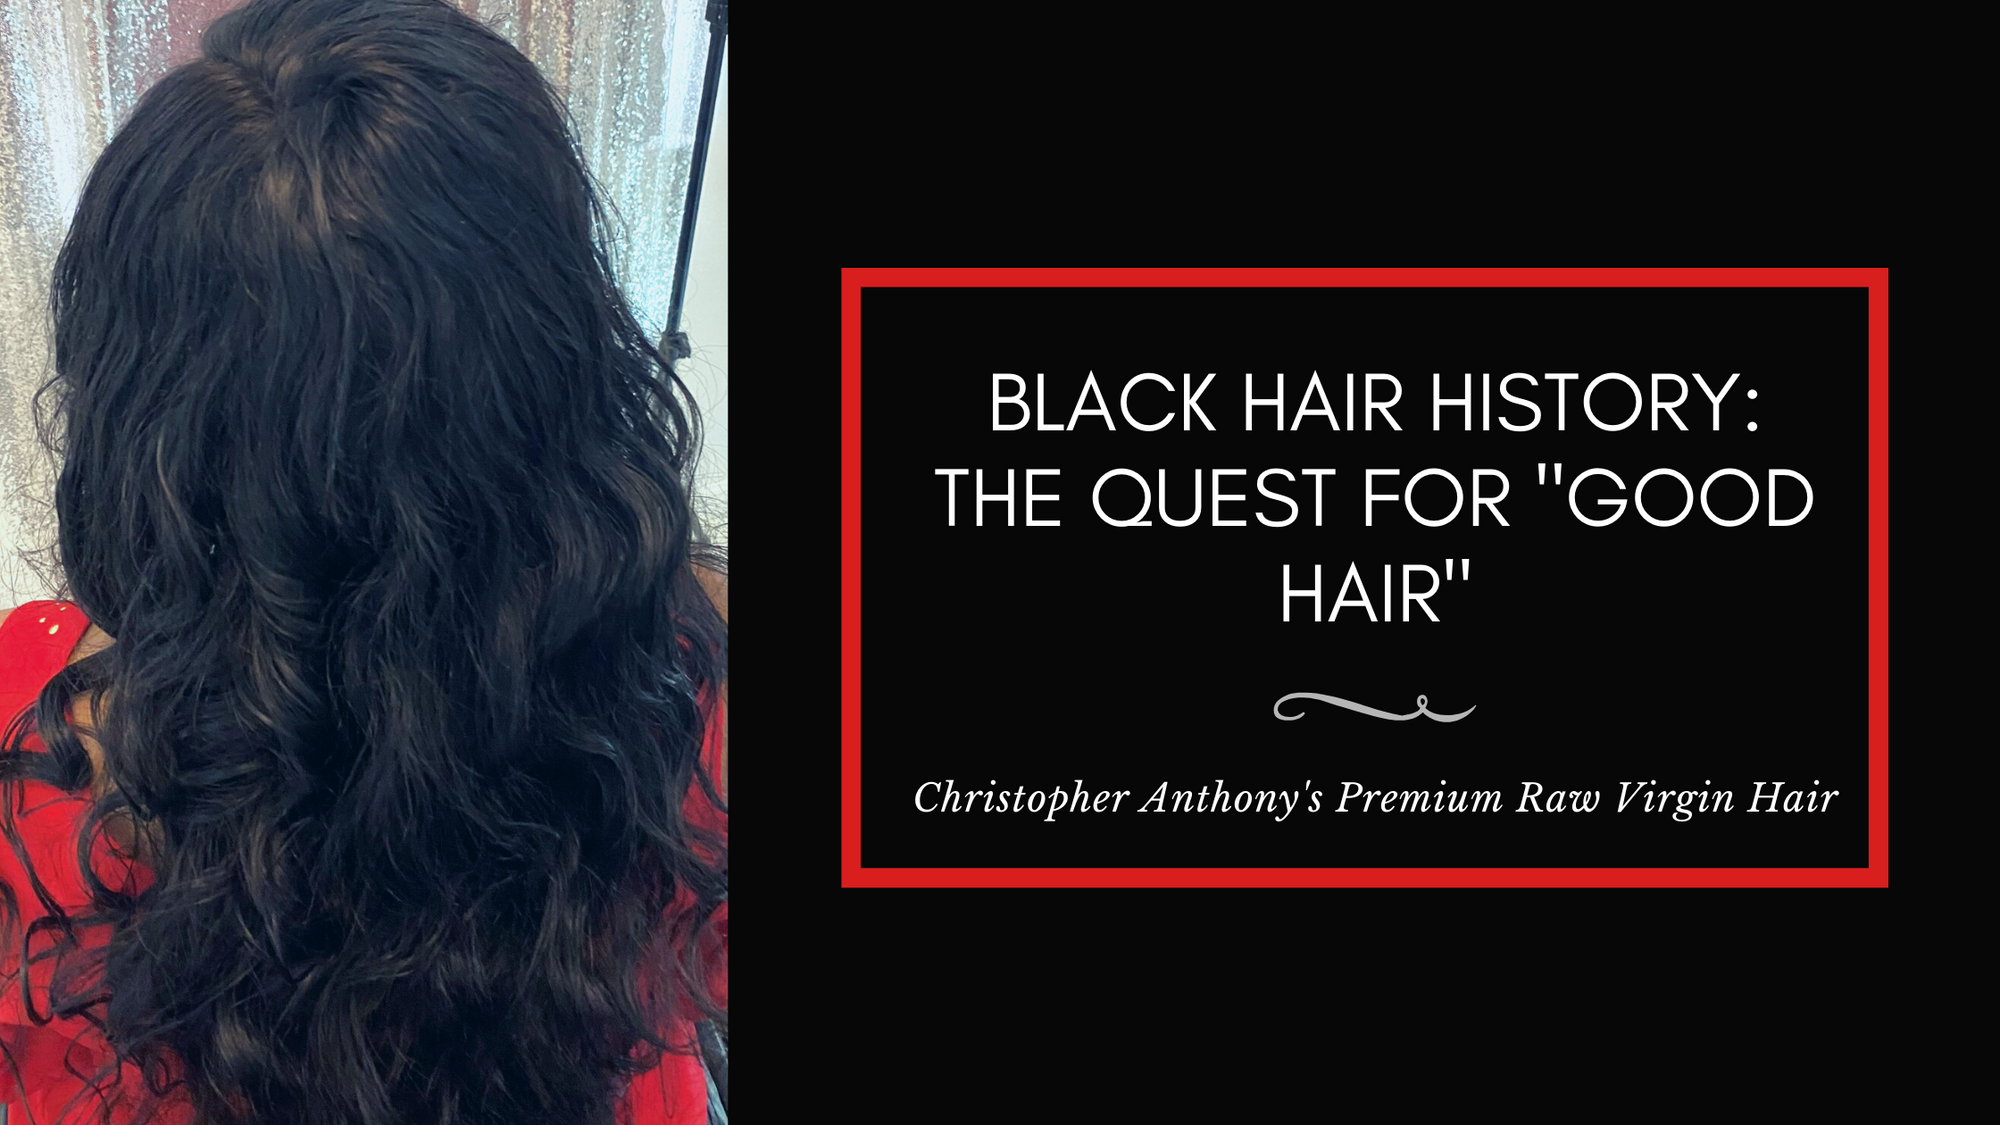 Black Hair History: The quest for “good hair”